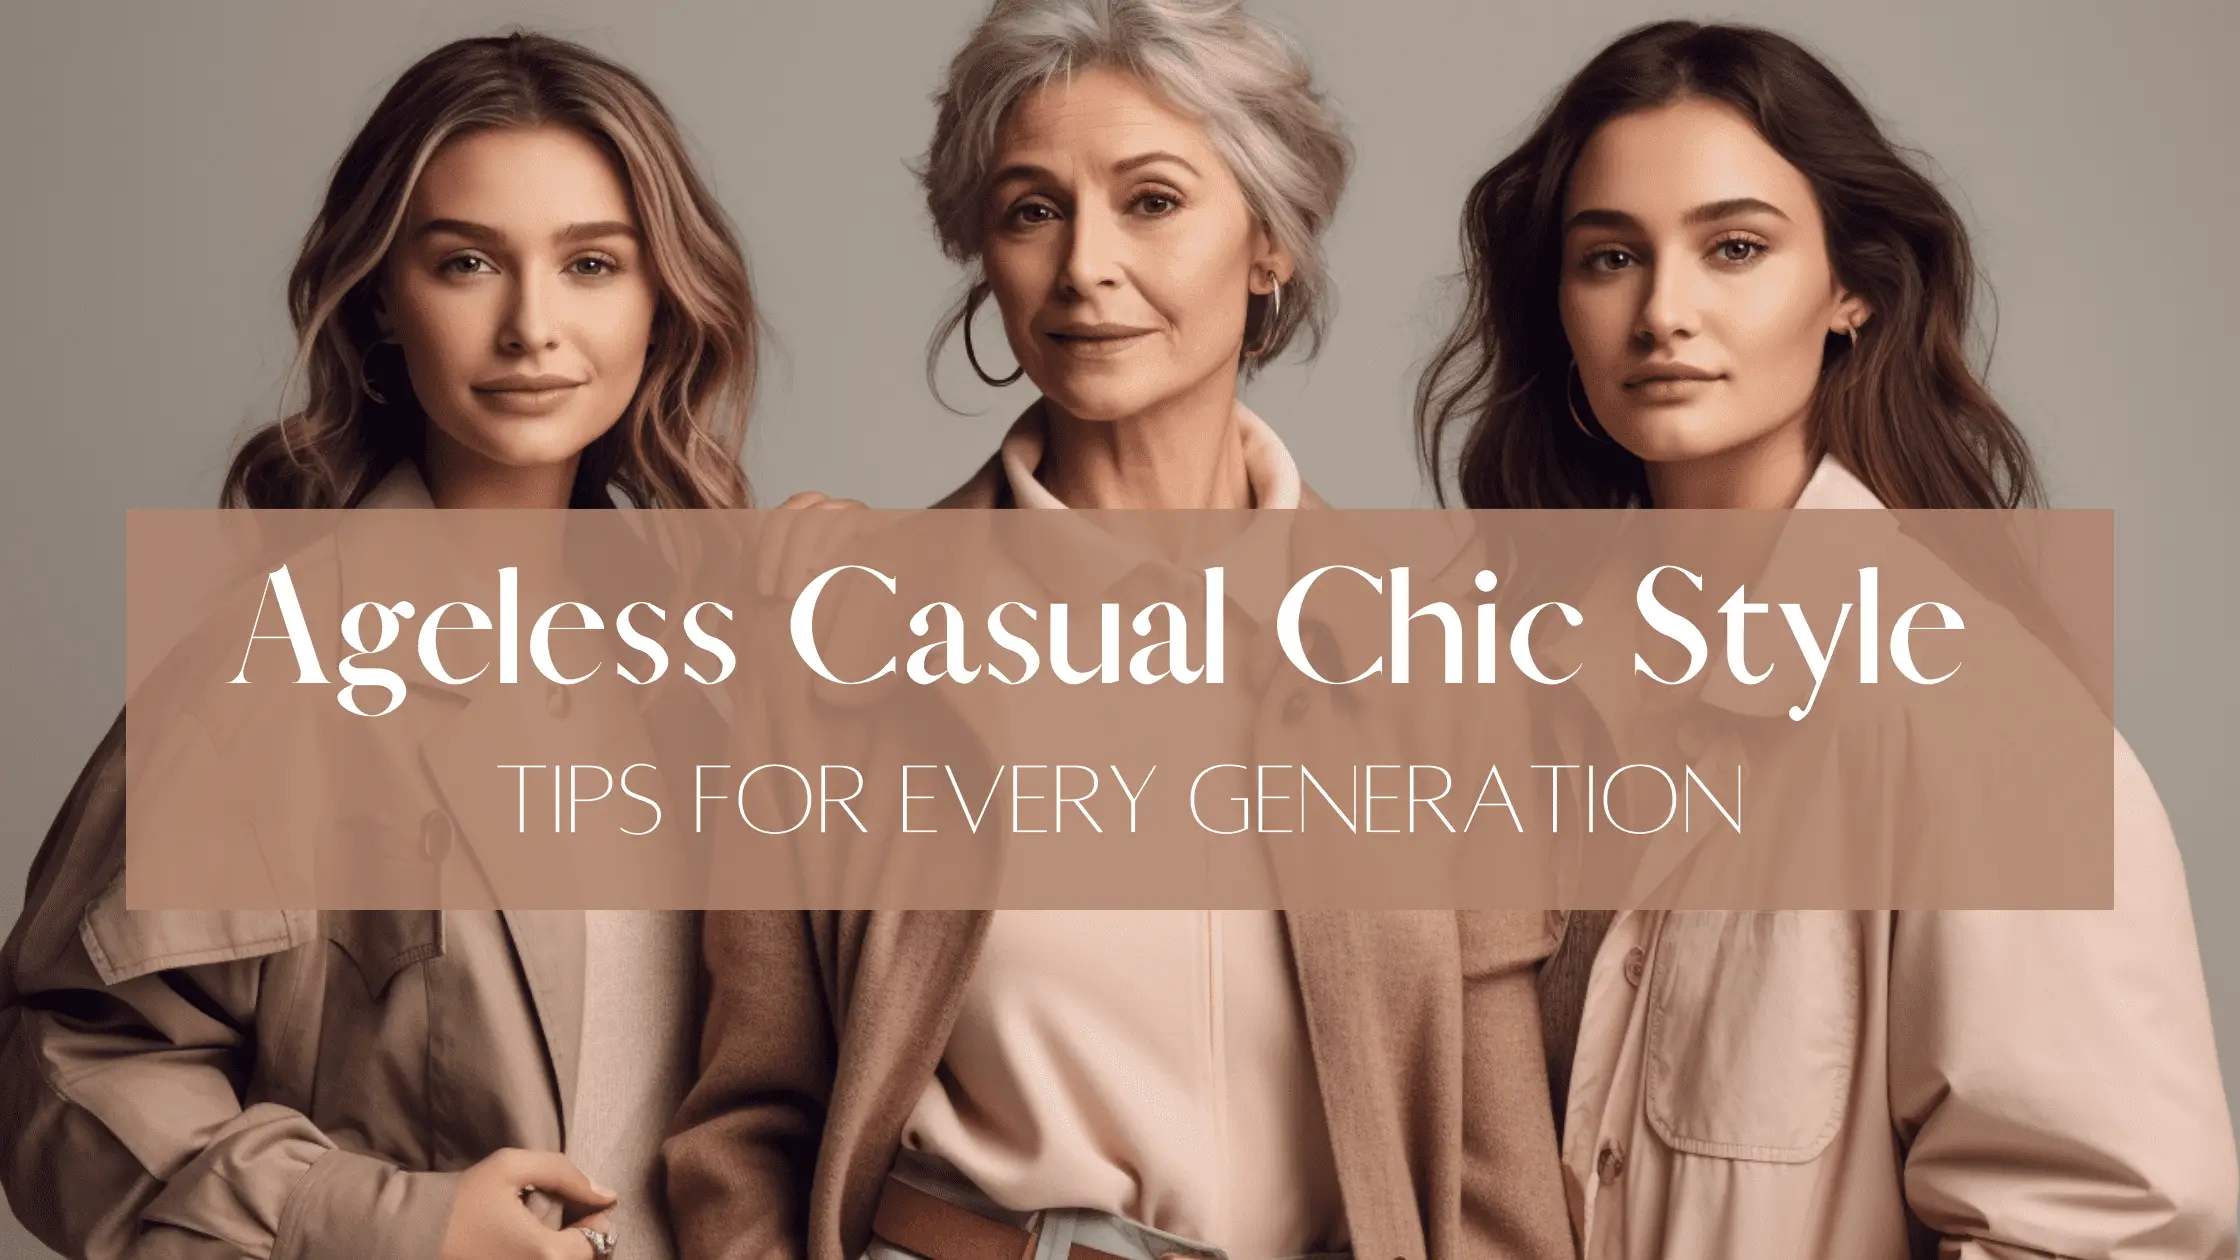 Ageless Casual Chic: Style Tips for Every Generation